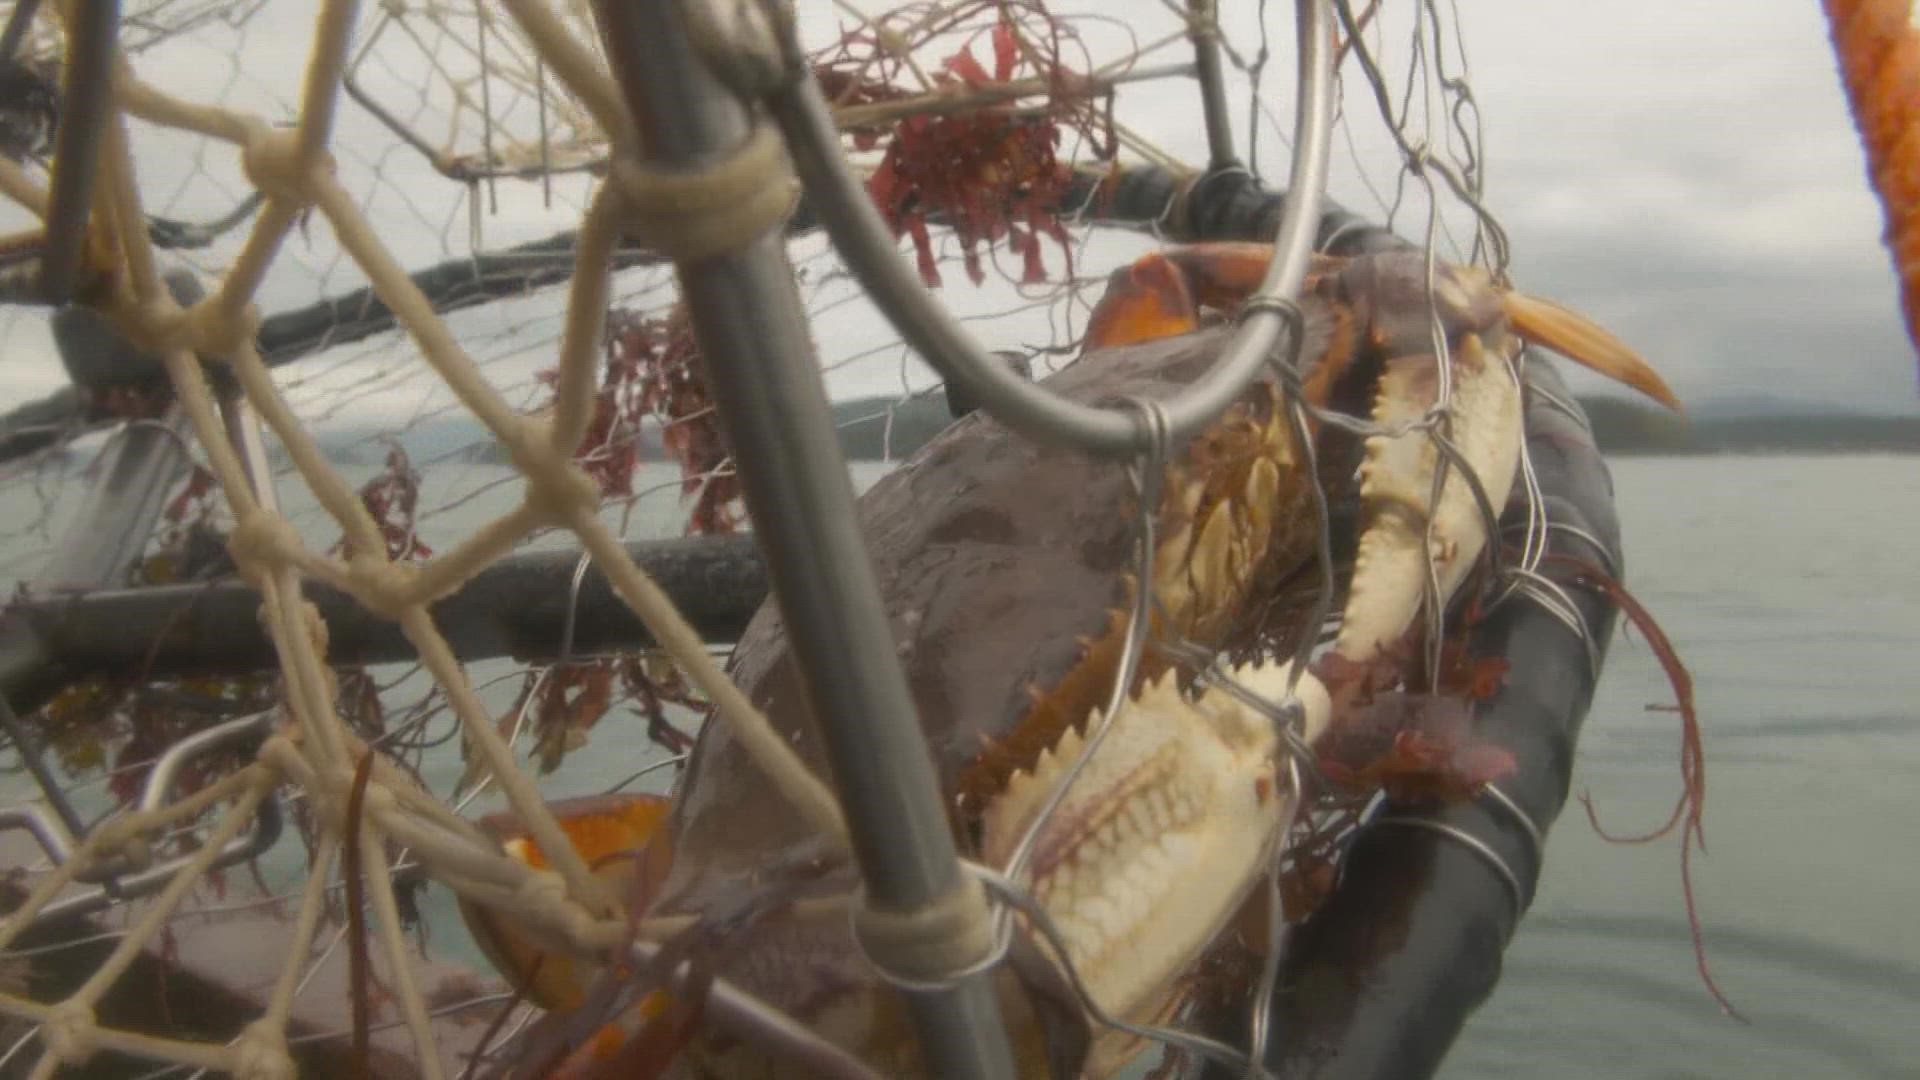 State officials are studying whether crabs could be impacted by ocean acidification, a process some scientists say Puget Sound is particularly susceptible to.